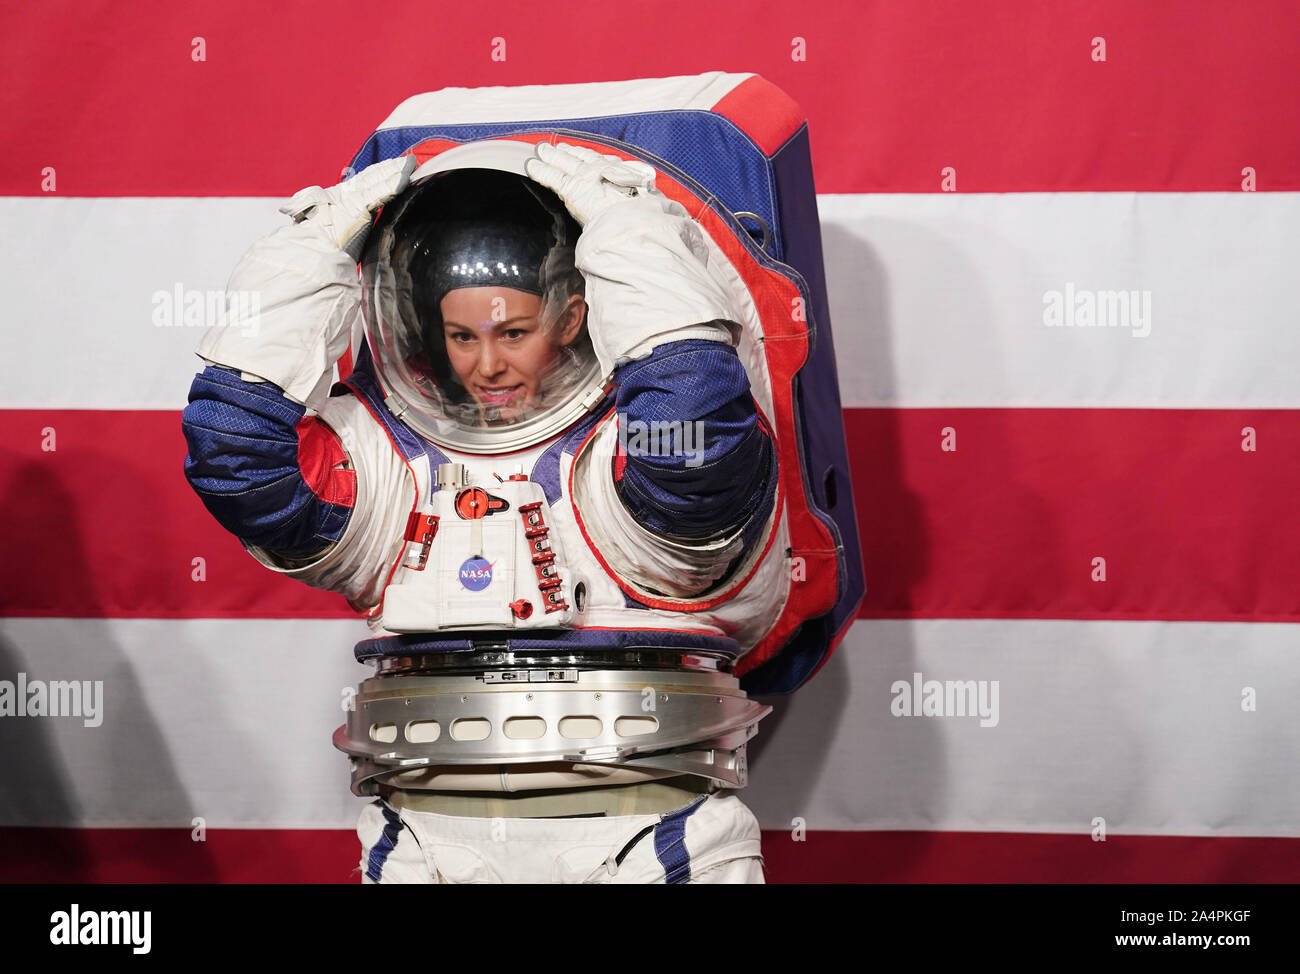 Washington, USA. 15th Oct, 2019. Advanced Space Suit Engineer Kristine Davis displays the Exploration Extravehicular Mobility Unit (xEMU) spacesuit at NASA headquarters in Washington, DC, the United States, on Oct. 15, 2019. The U.S. space agency NASA unveiled on Tuesday the next-generation spacesuits to be used in its Artemis program that will send the first woman and next man to the Lunar South Pole by 2024. Credit: Liu Jie/Xinhua/Alamy Live News Stock Photo